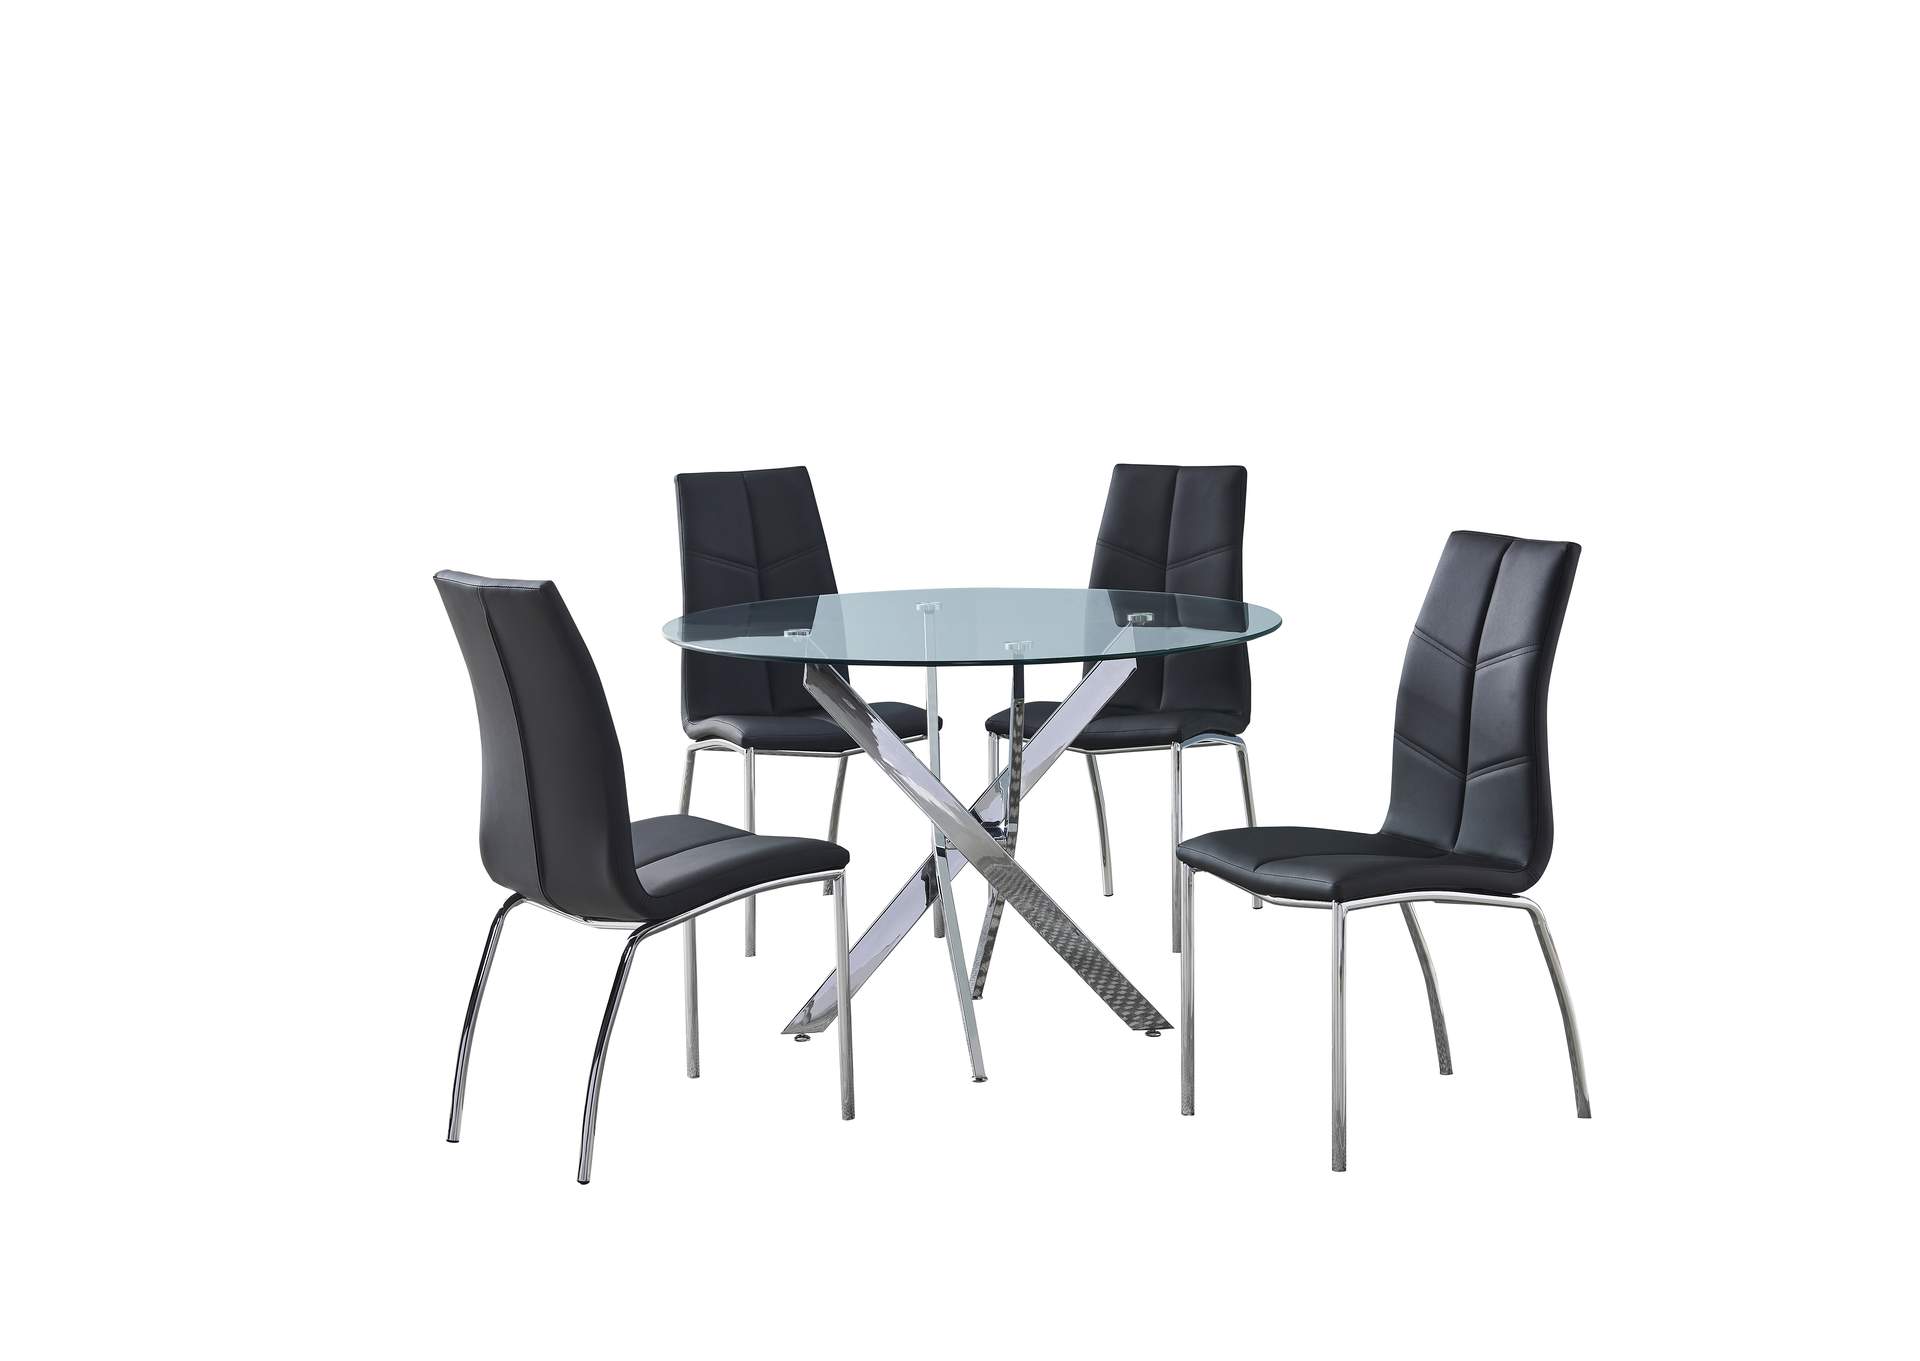 D3737 Black Dining Chair,Global Trading